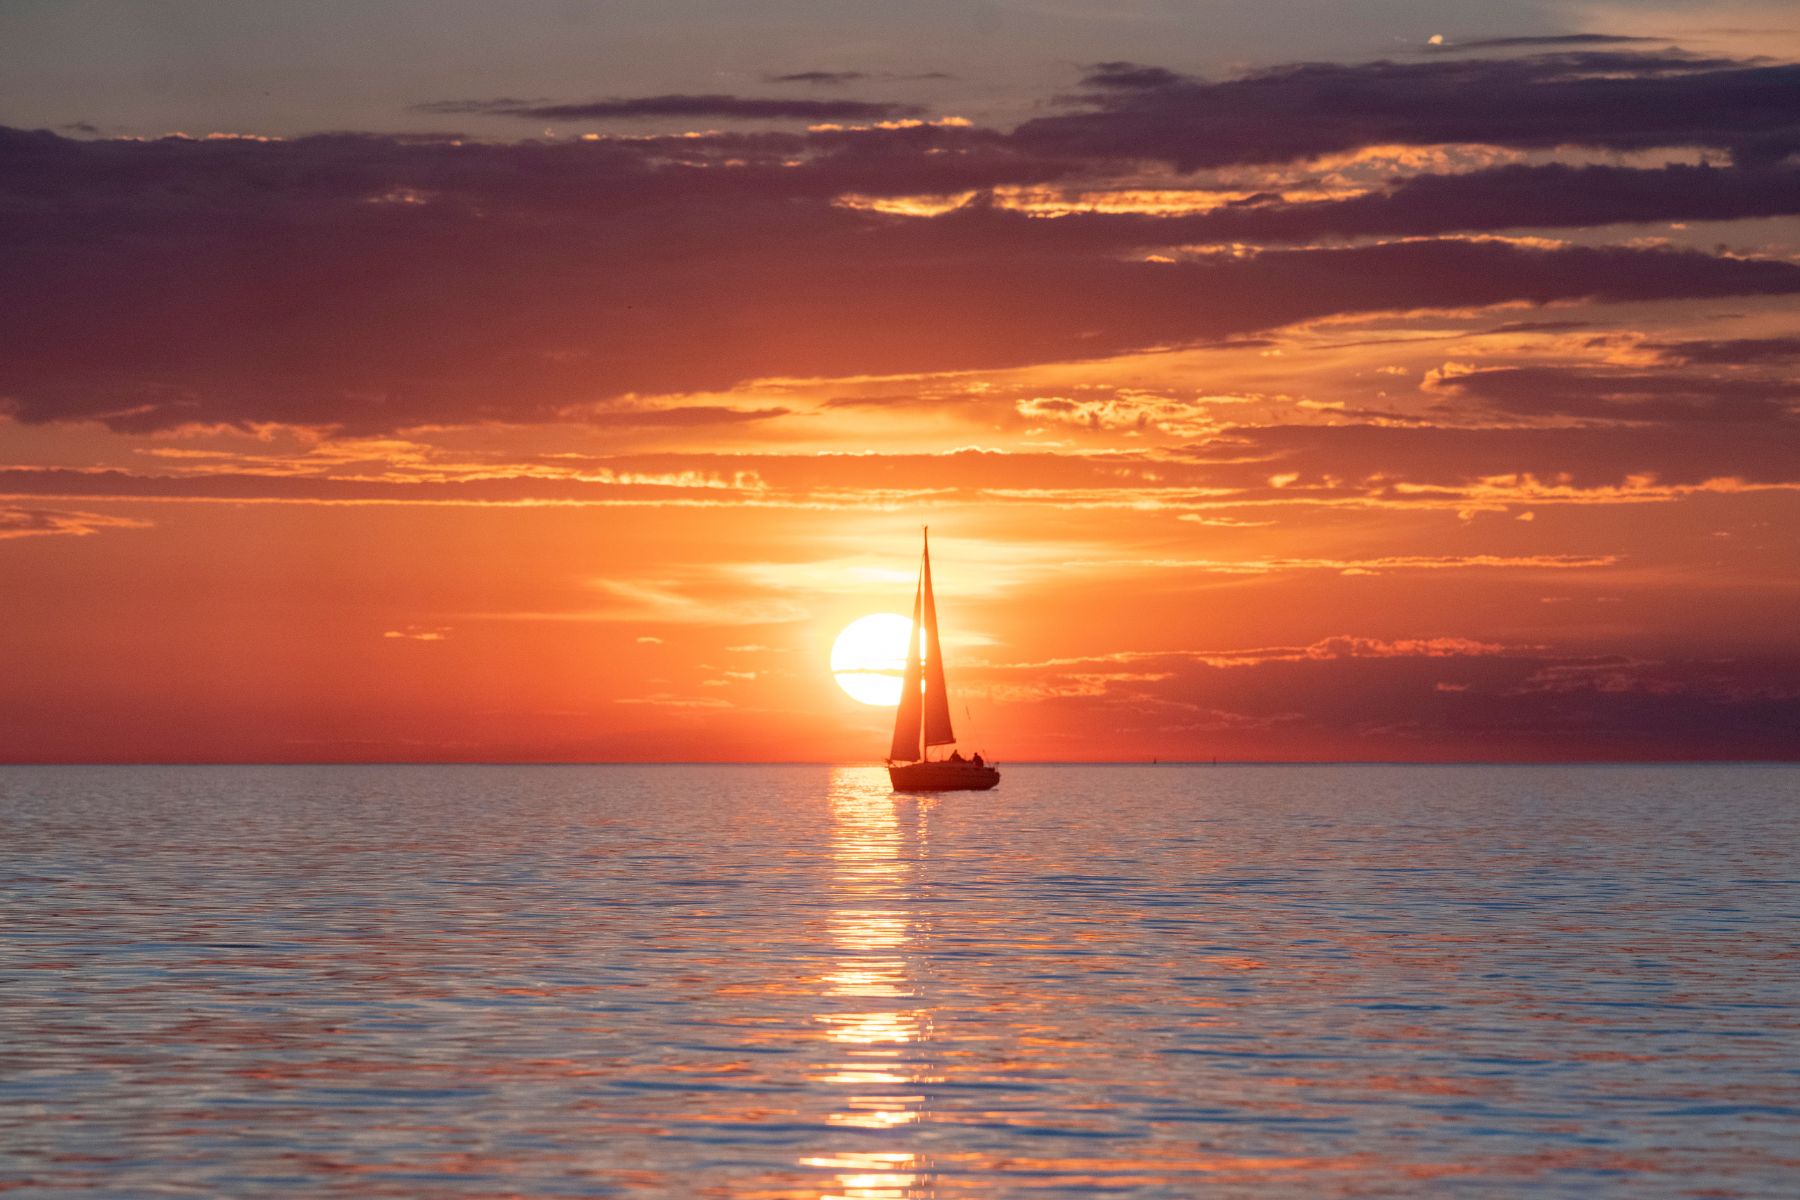 A boat silhouetted against the sunset, Tallinn Bay, Estonia